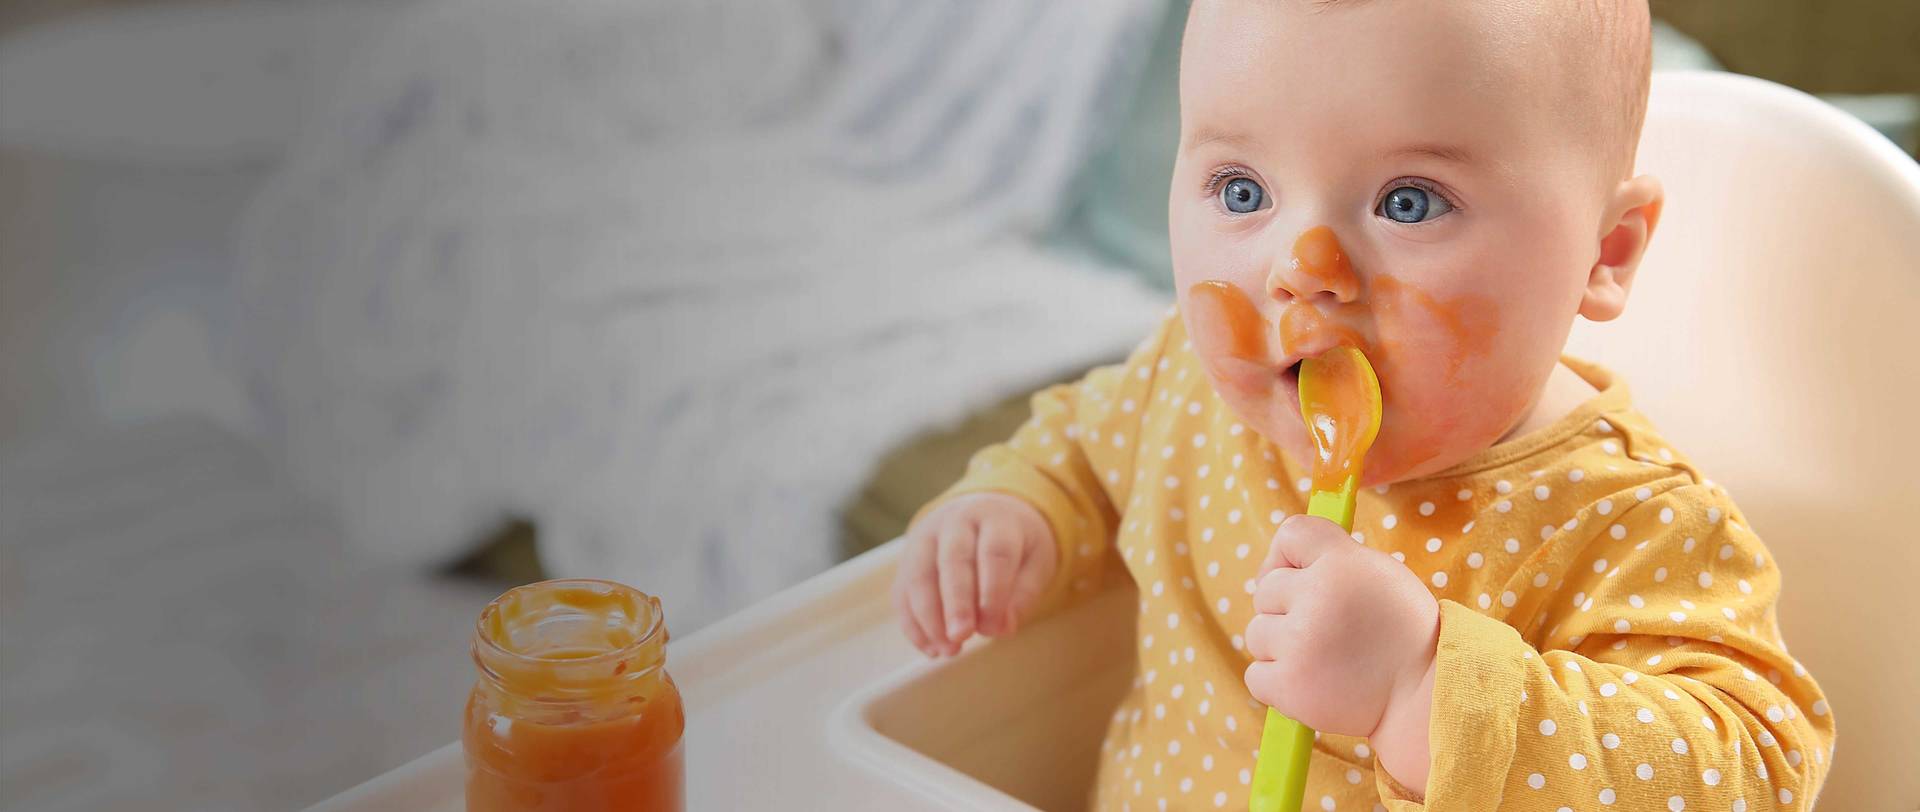 Home Page Carousel Hero - baby eating carrot baby food